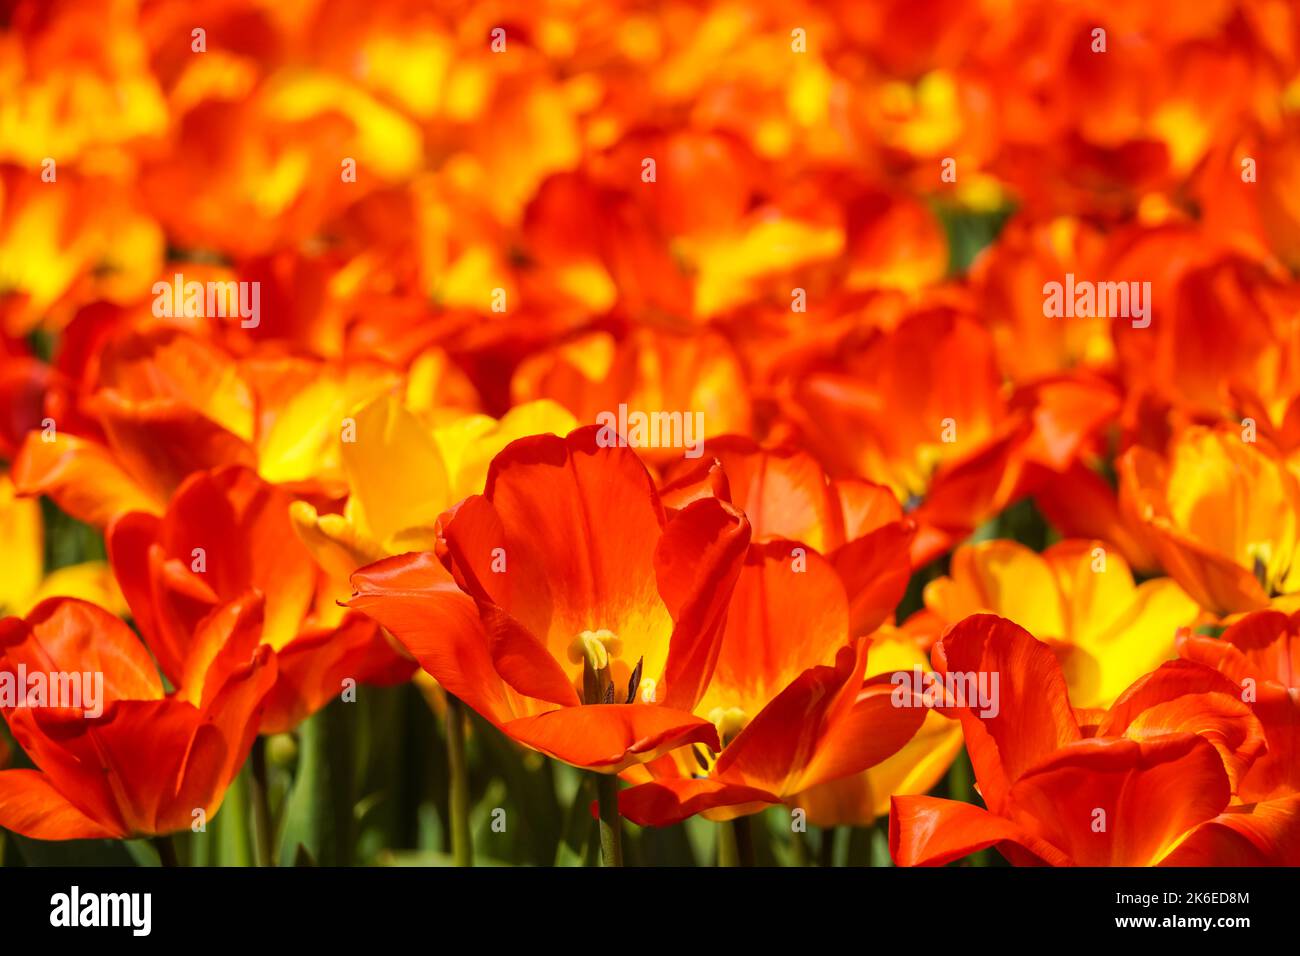 Red and yellow tulips growing on flowerbed Stock Photo